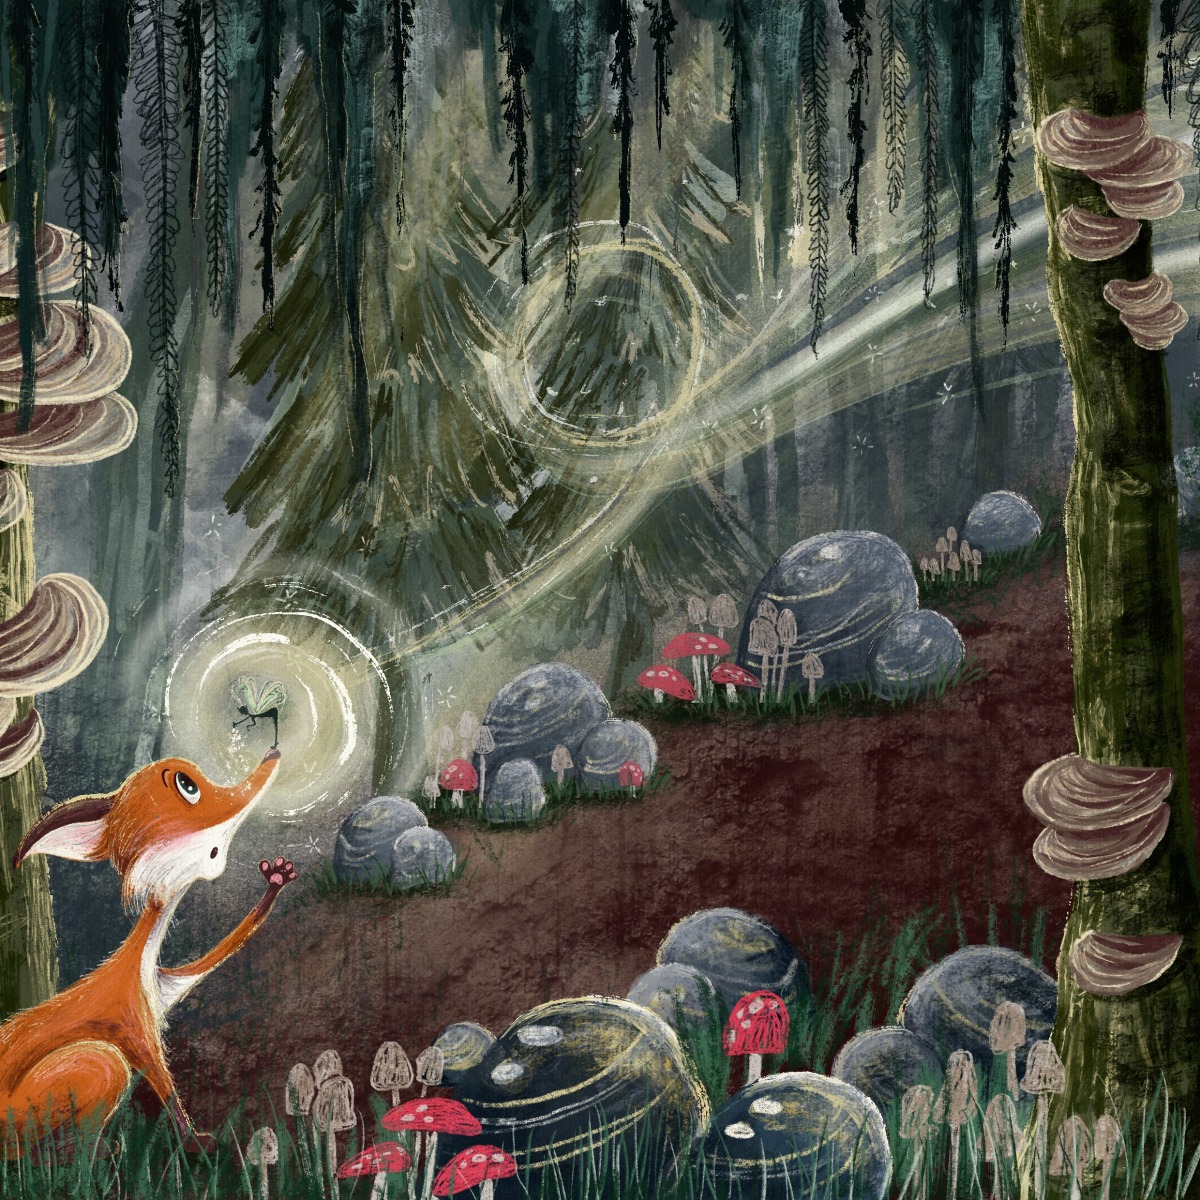 My project for course: Children’s Illustration with Procreate: Paint ...